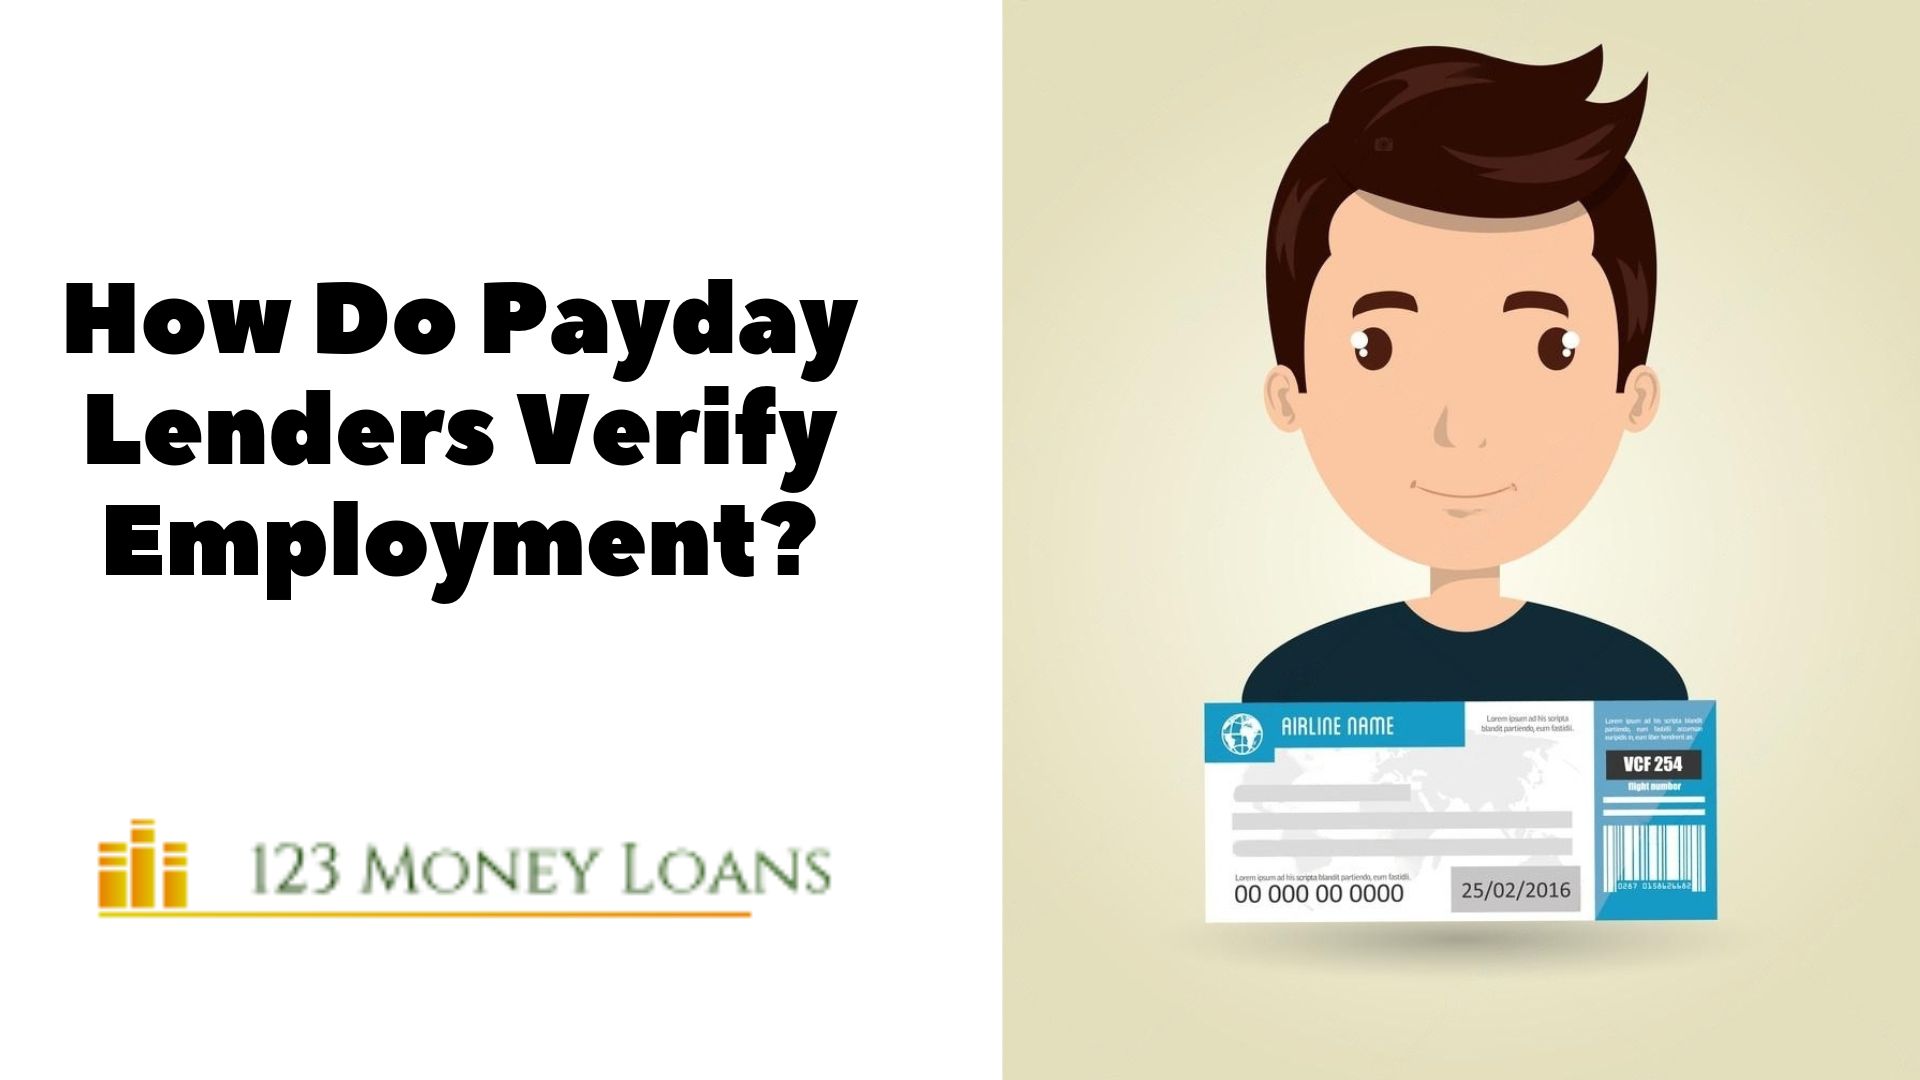 How Do Payday Lenders Verify Employment?